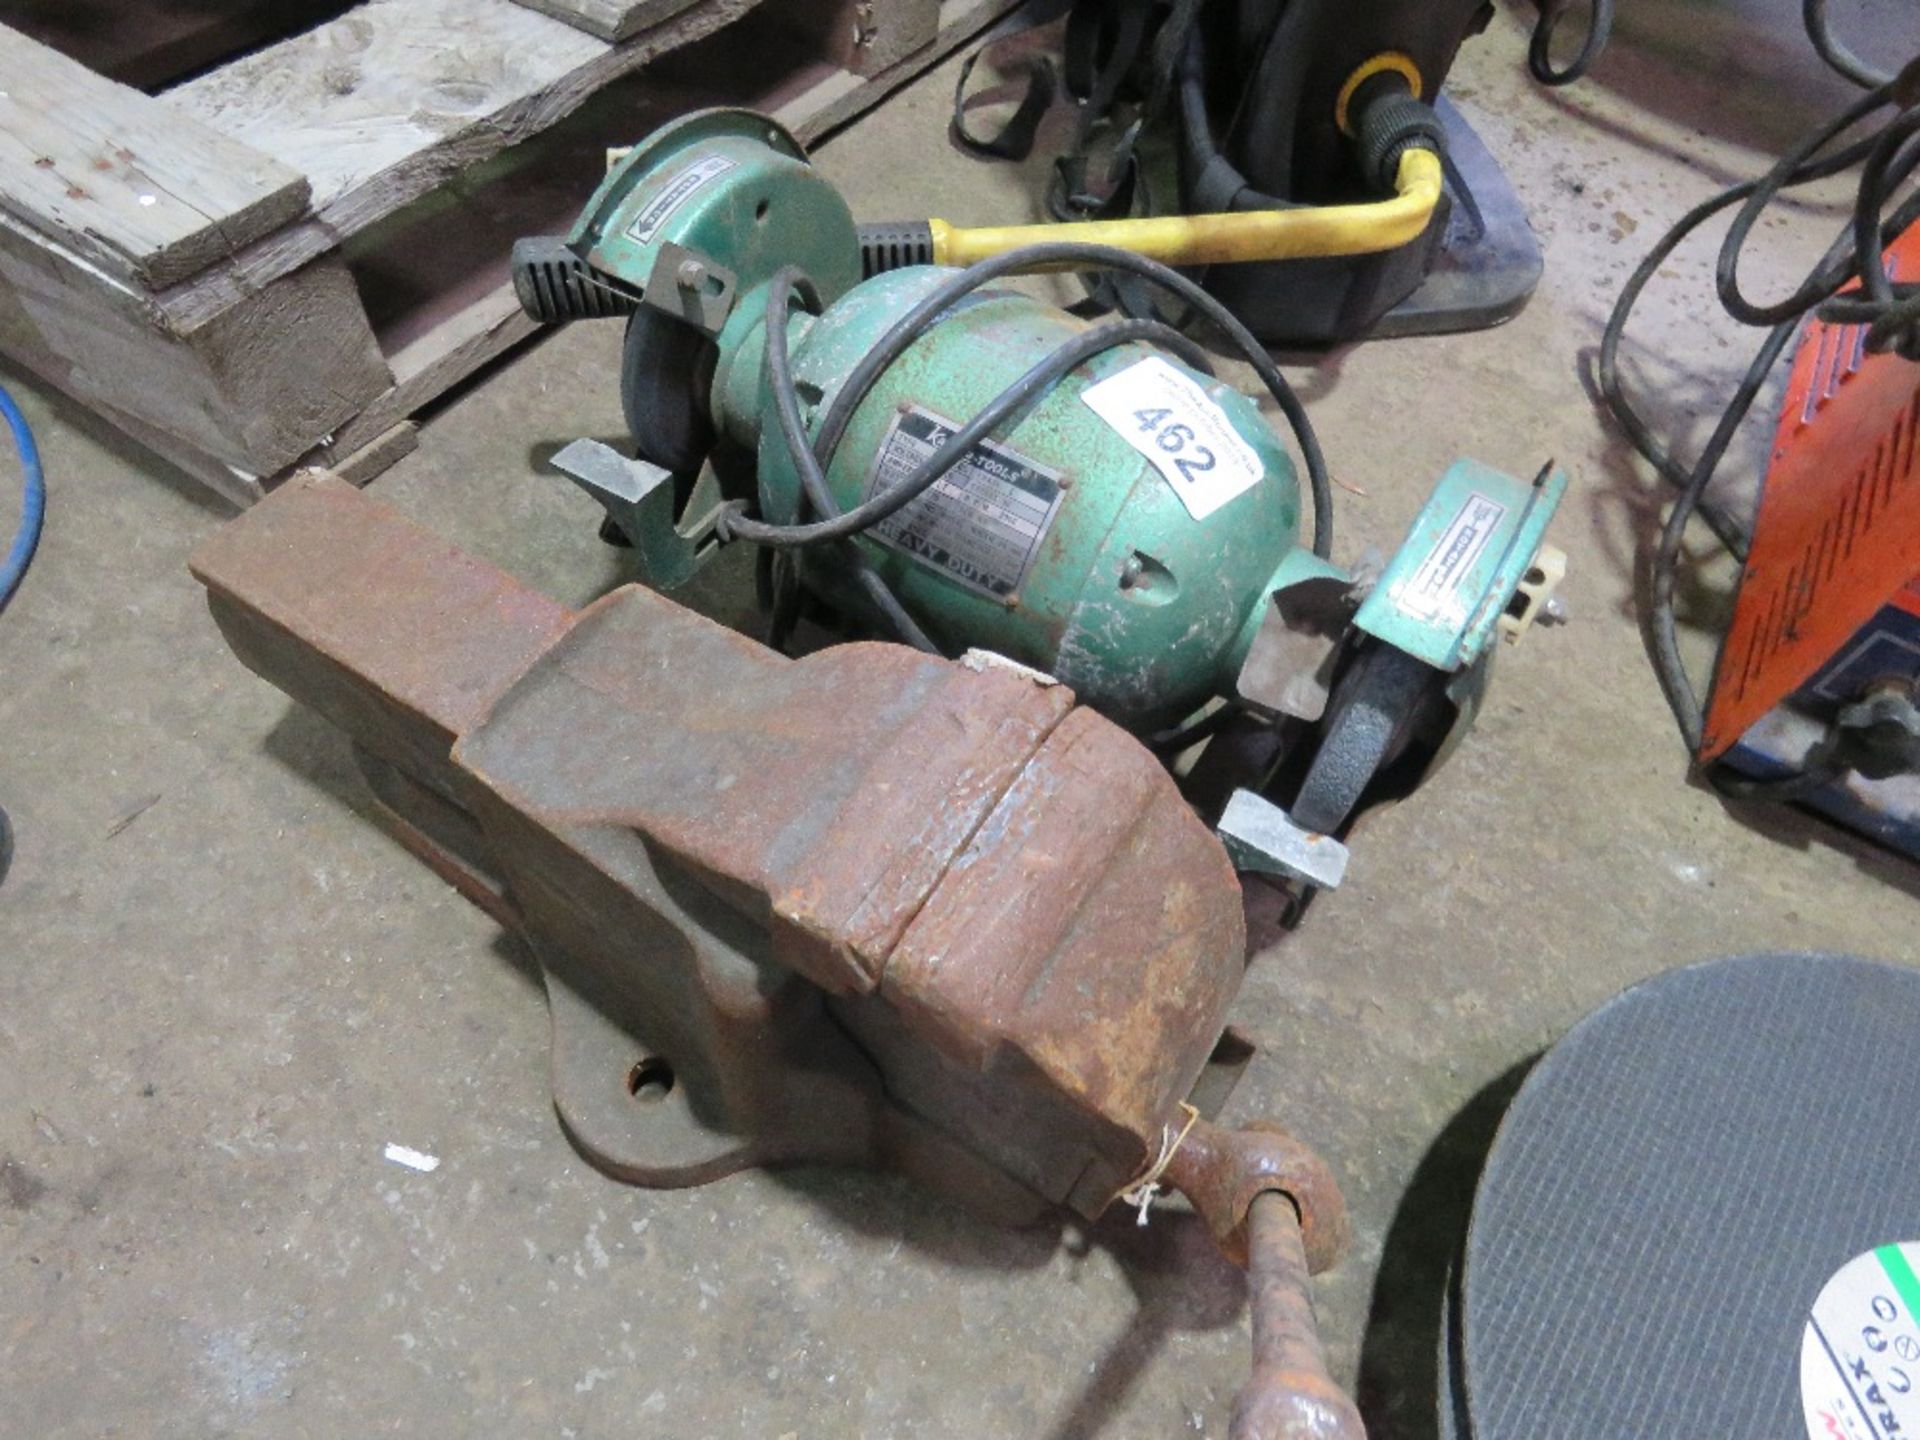 LARGE VICE PLUS A BENCHGRINDER. SOURCED FROM SITE CLOSURE/CLEARANCE.